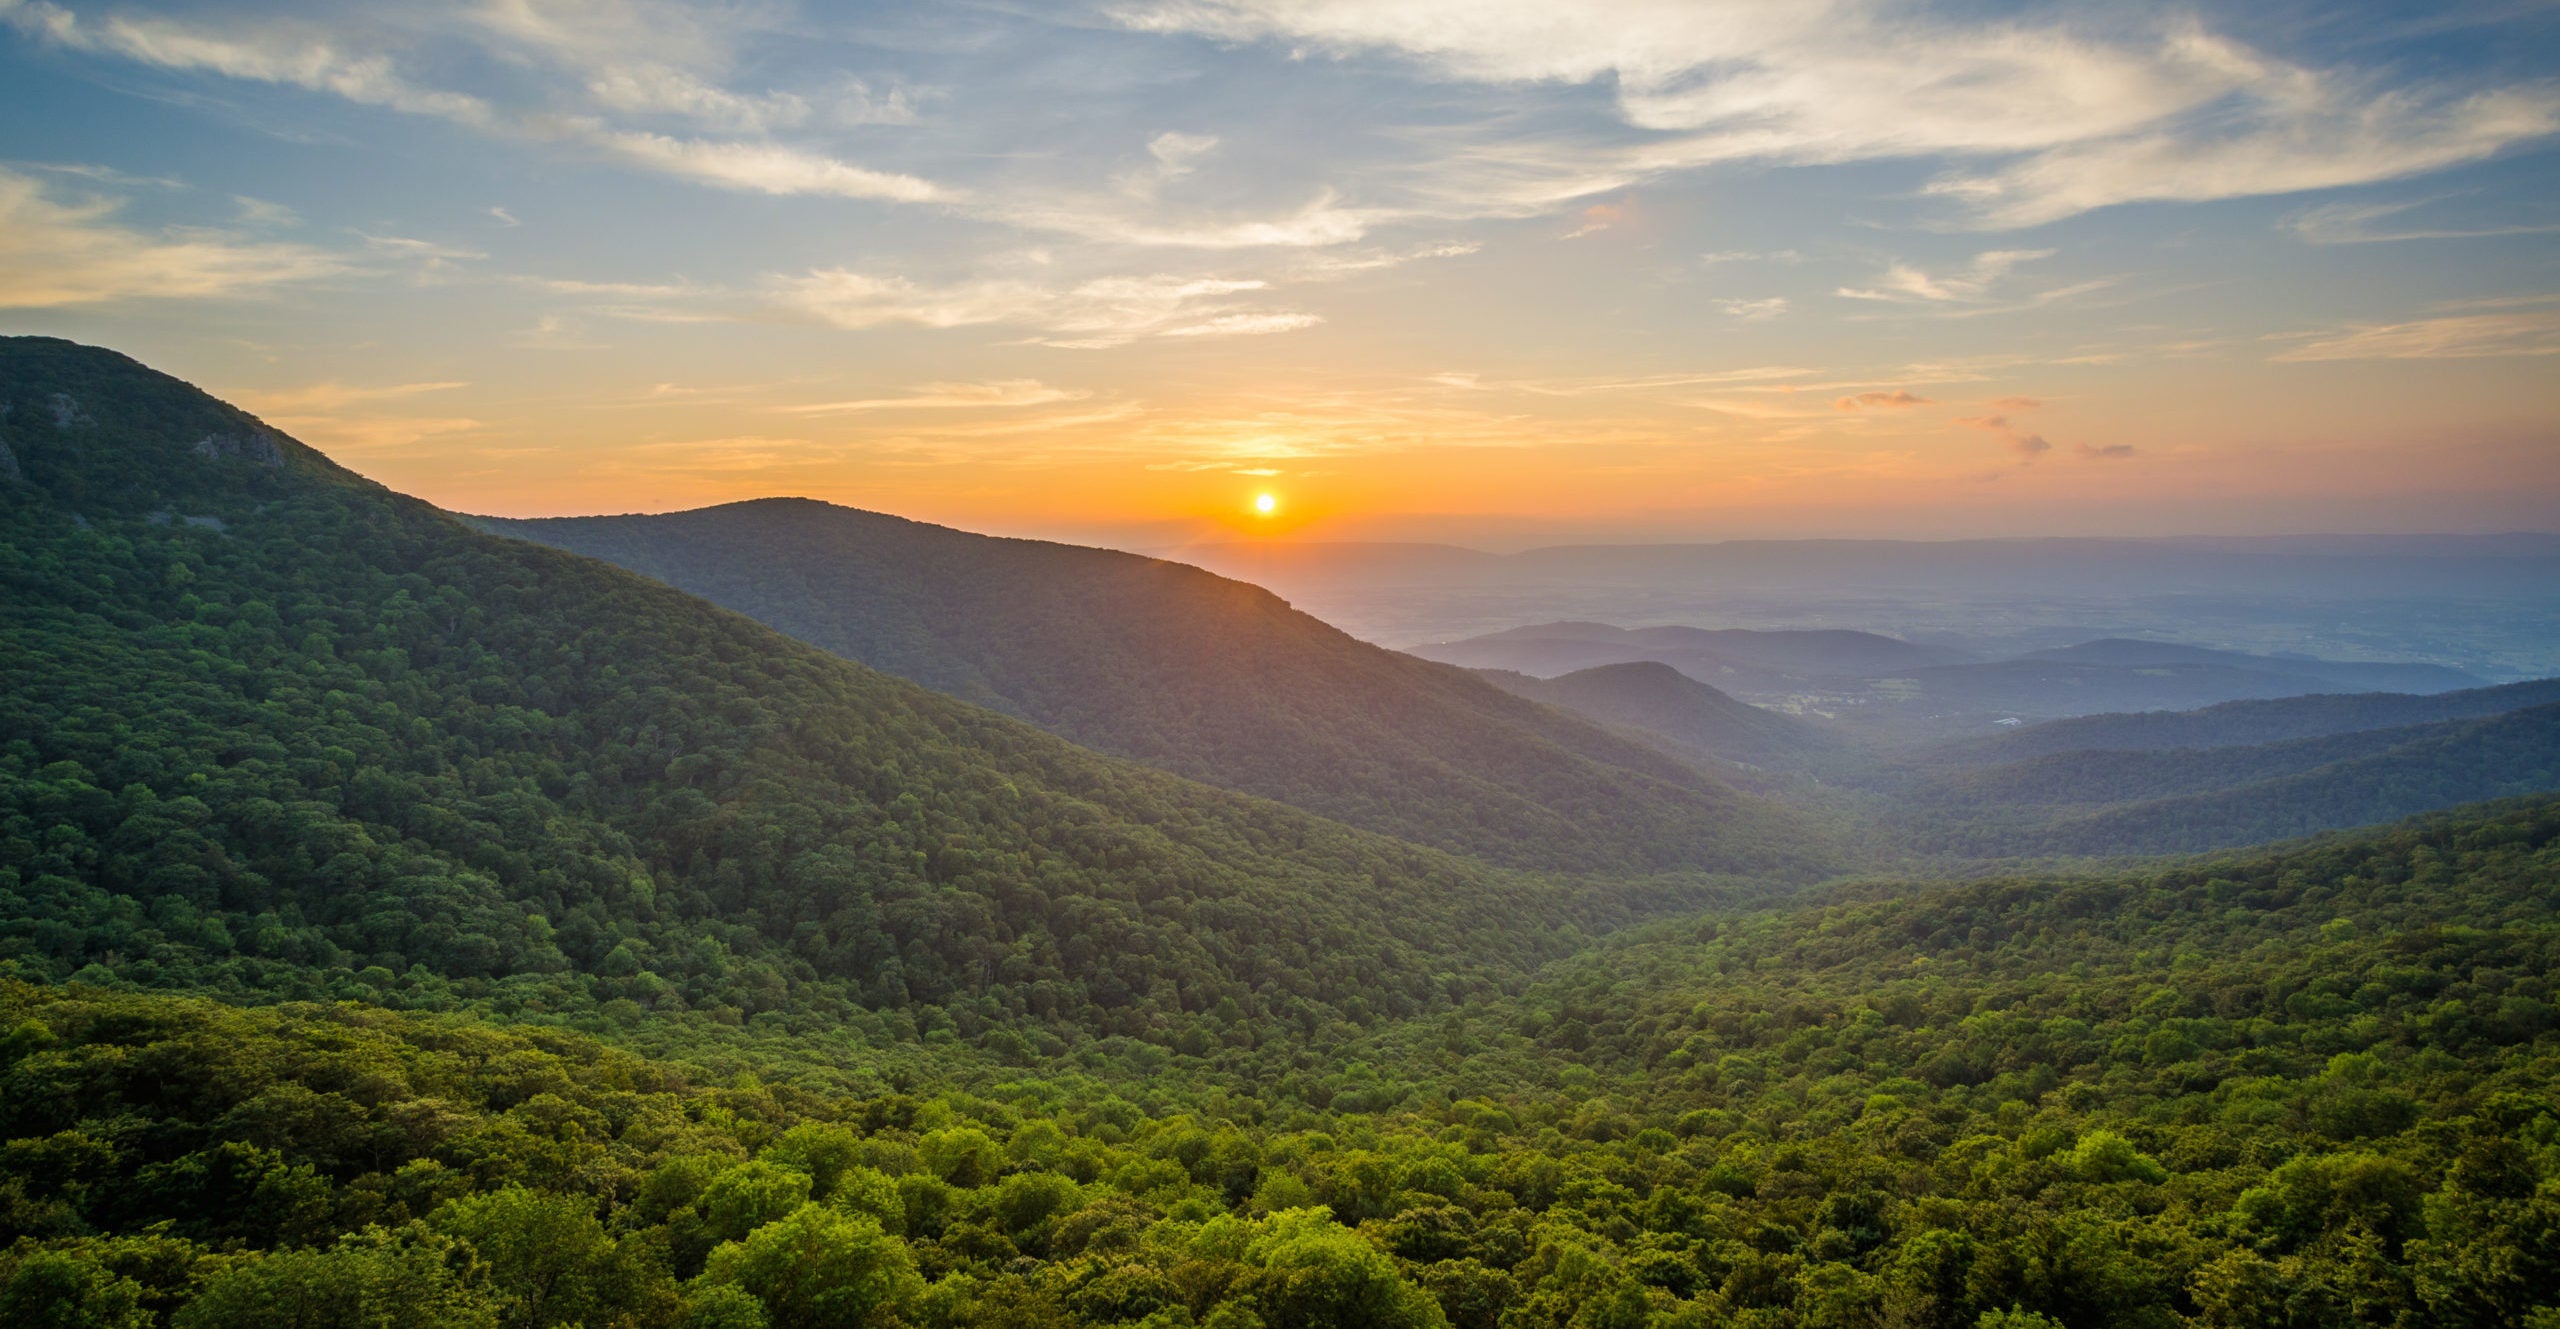 Image of sunset over Shenandoah National Park, located just east of Charlottesville